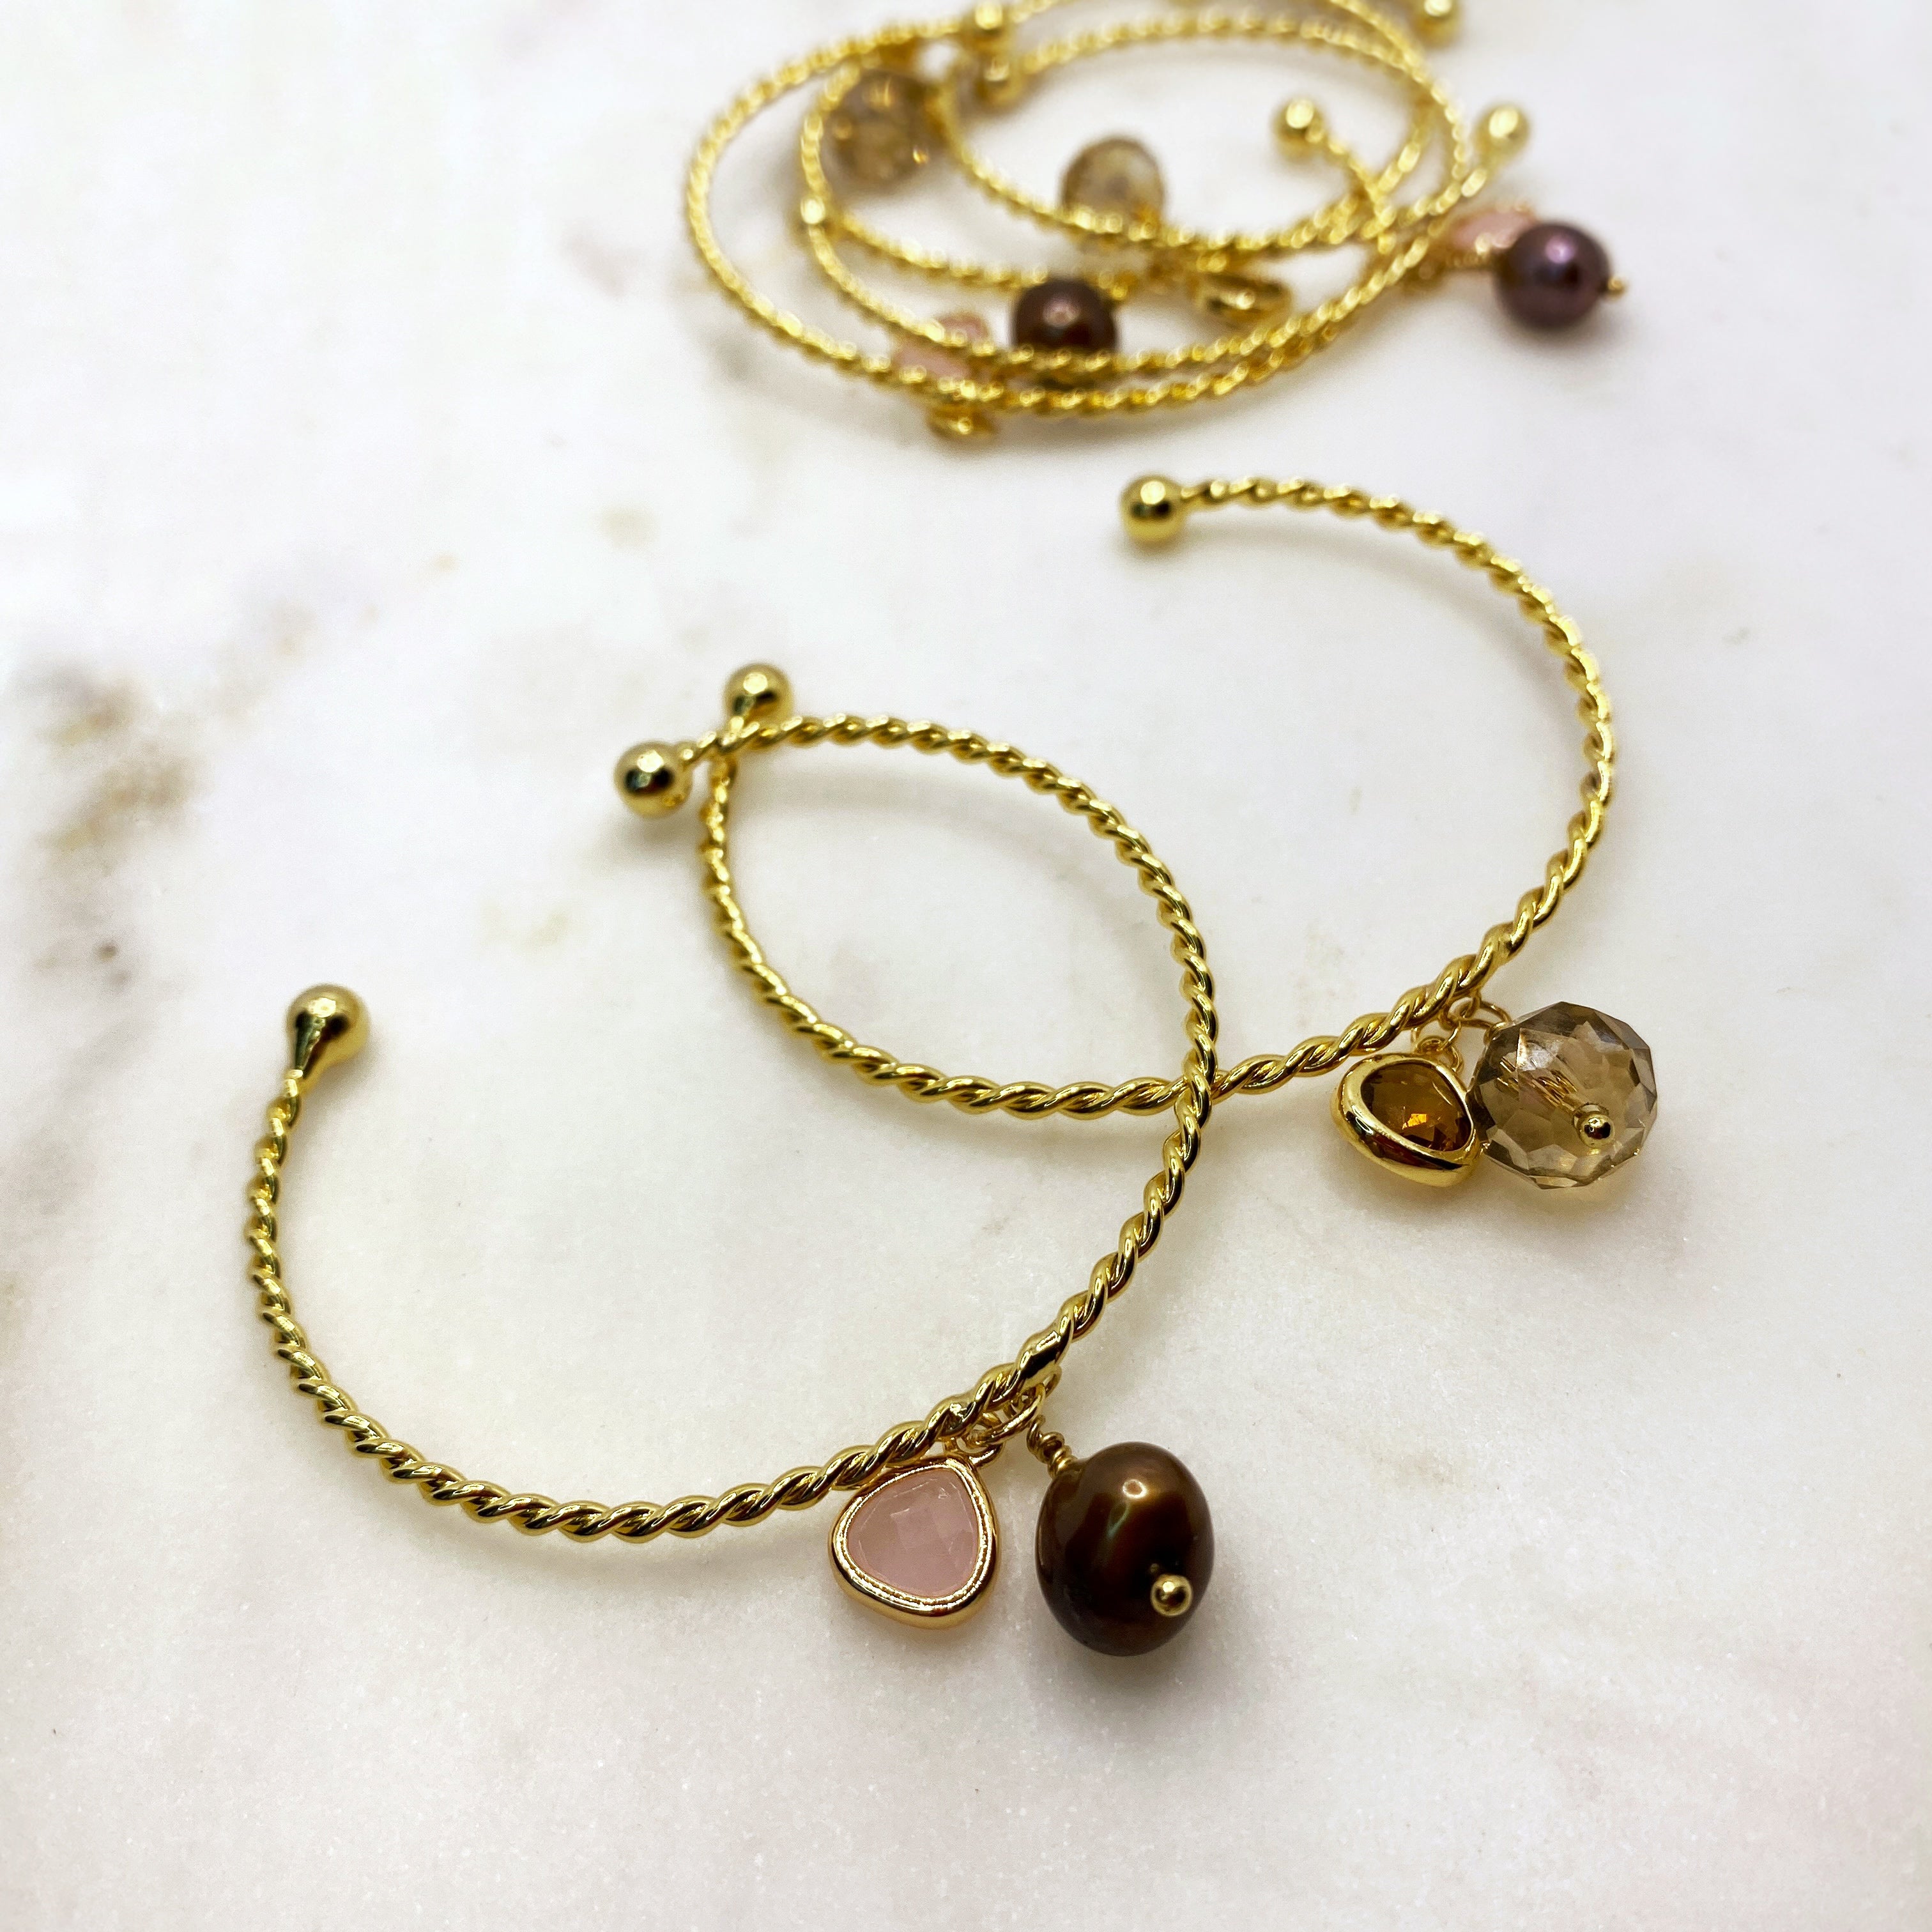 Gold spiral cuff with dainty charms